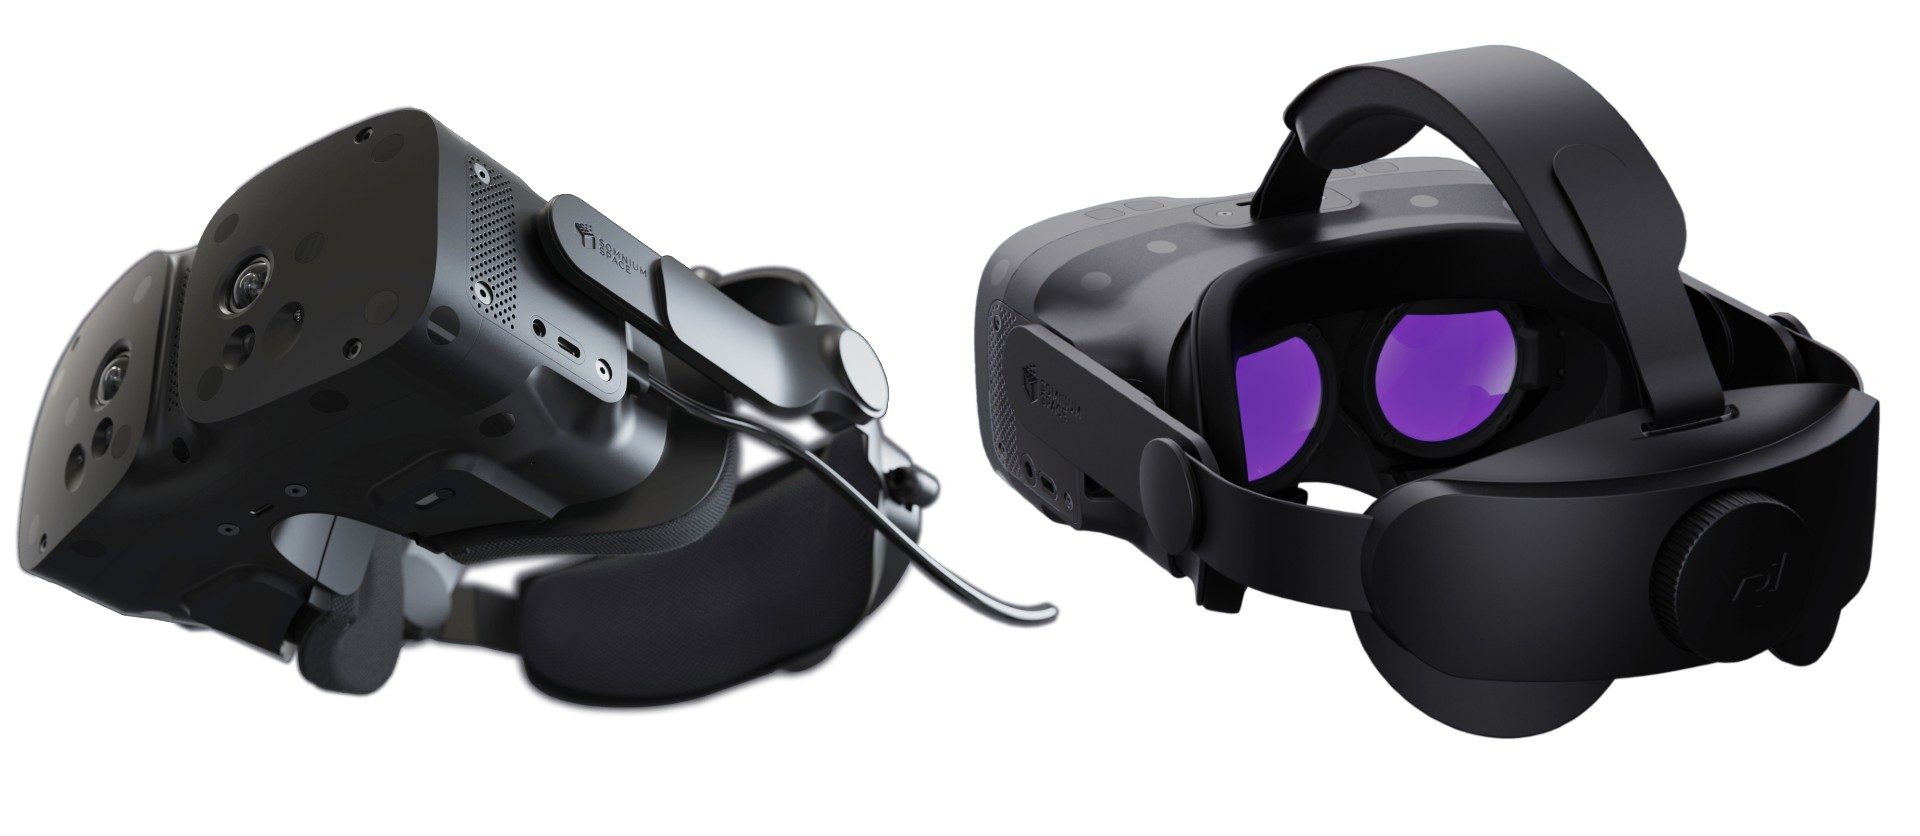 Nearing Launch, Somnium Headset Partners With Maker of Unique Finger-sensing VR Controllers